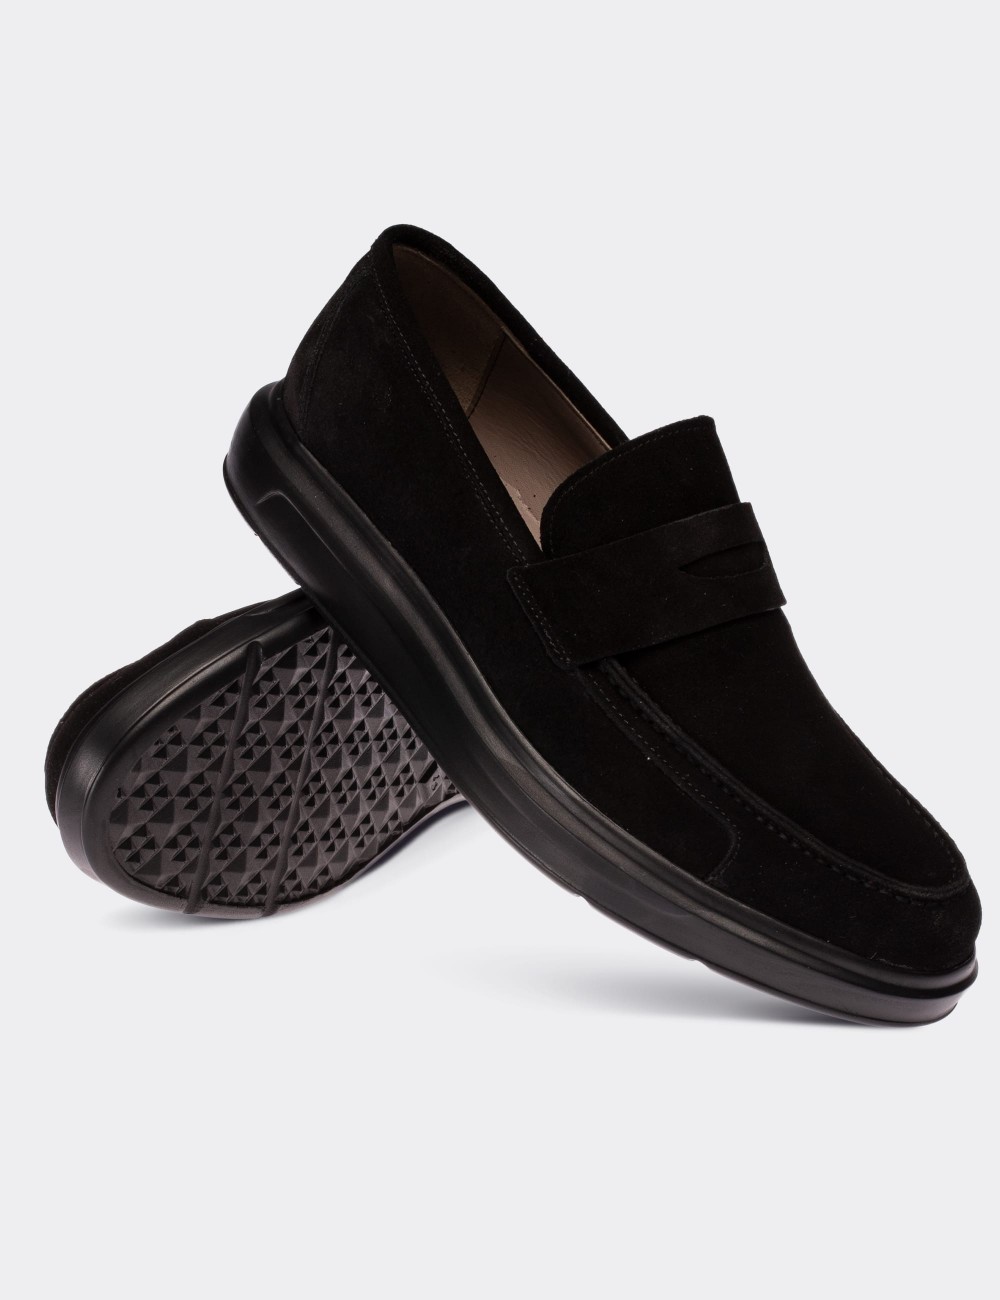 Black Suede Leather Loafers - 01564MSYHP06